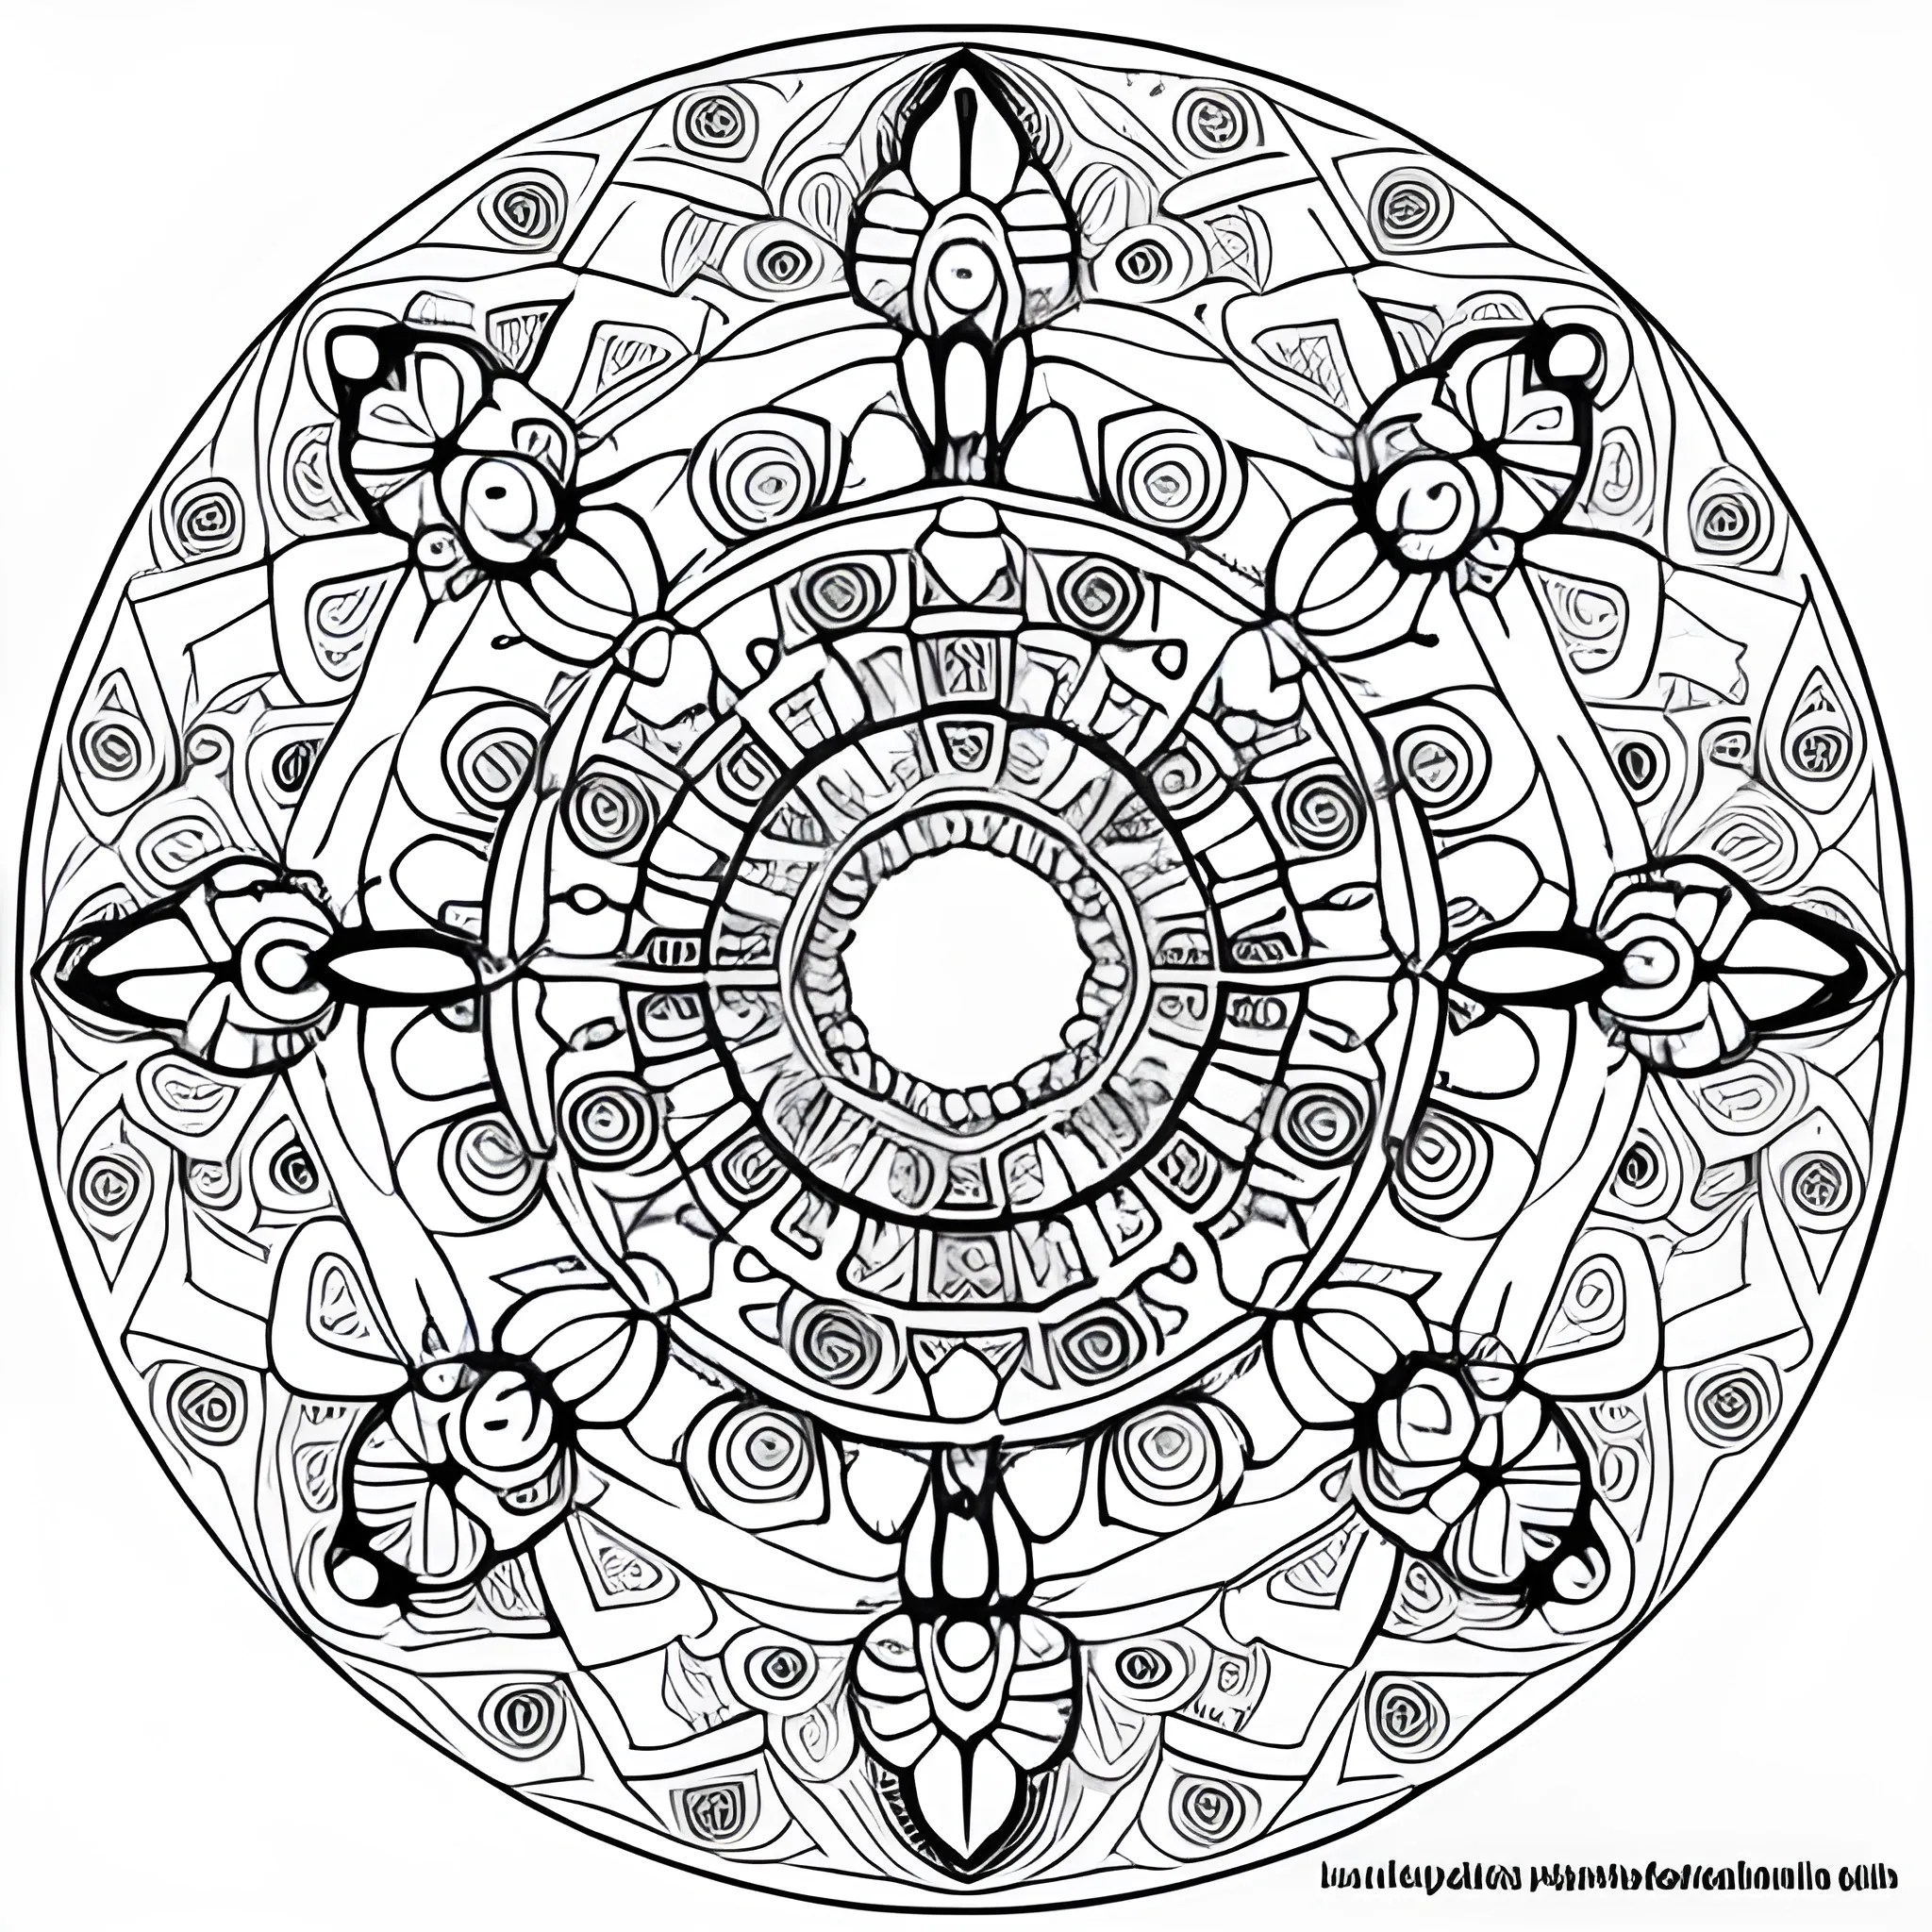 coloring book page detailed mandala dragon, inside a floral circle, white background, stencil bold lines, floral, inspired in the arabic culture